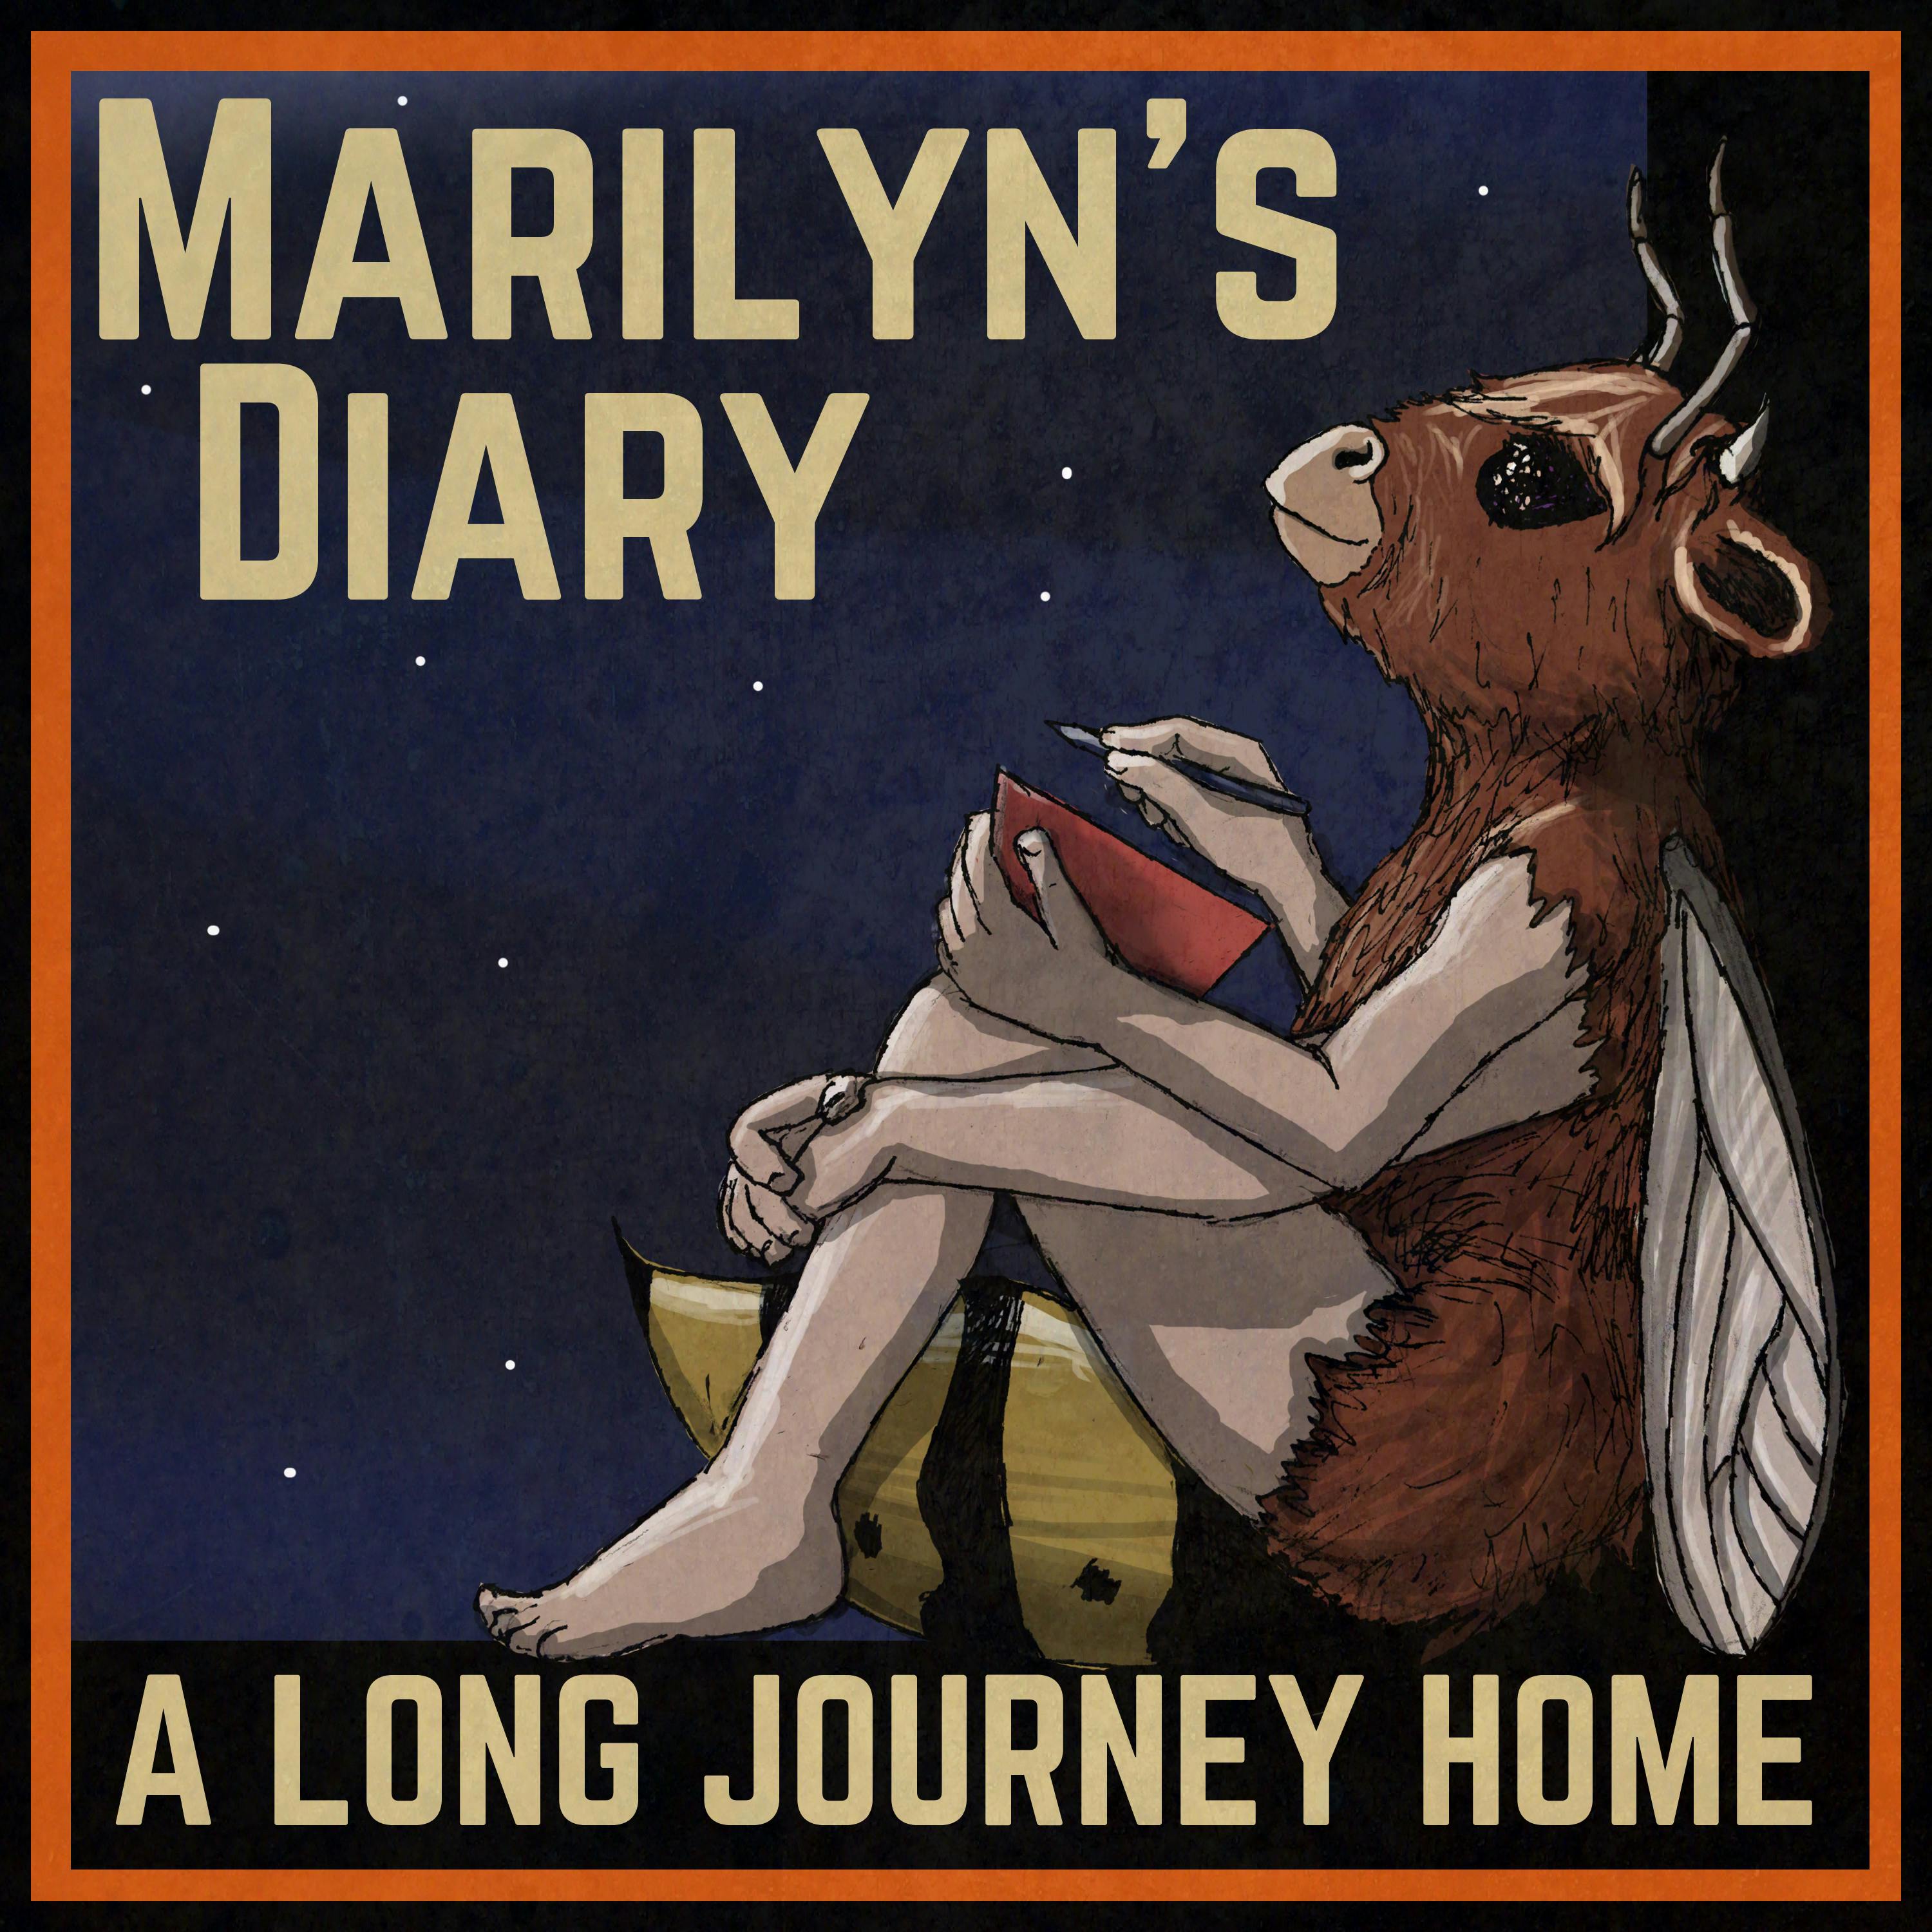 Marilyn's Diary: A Long Journey Home - E06